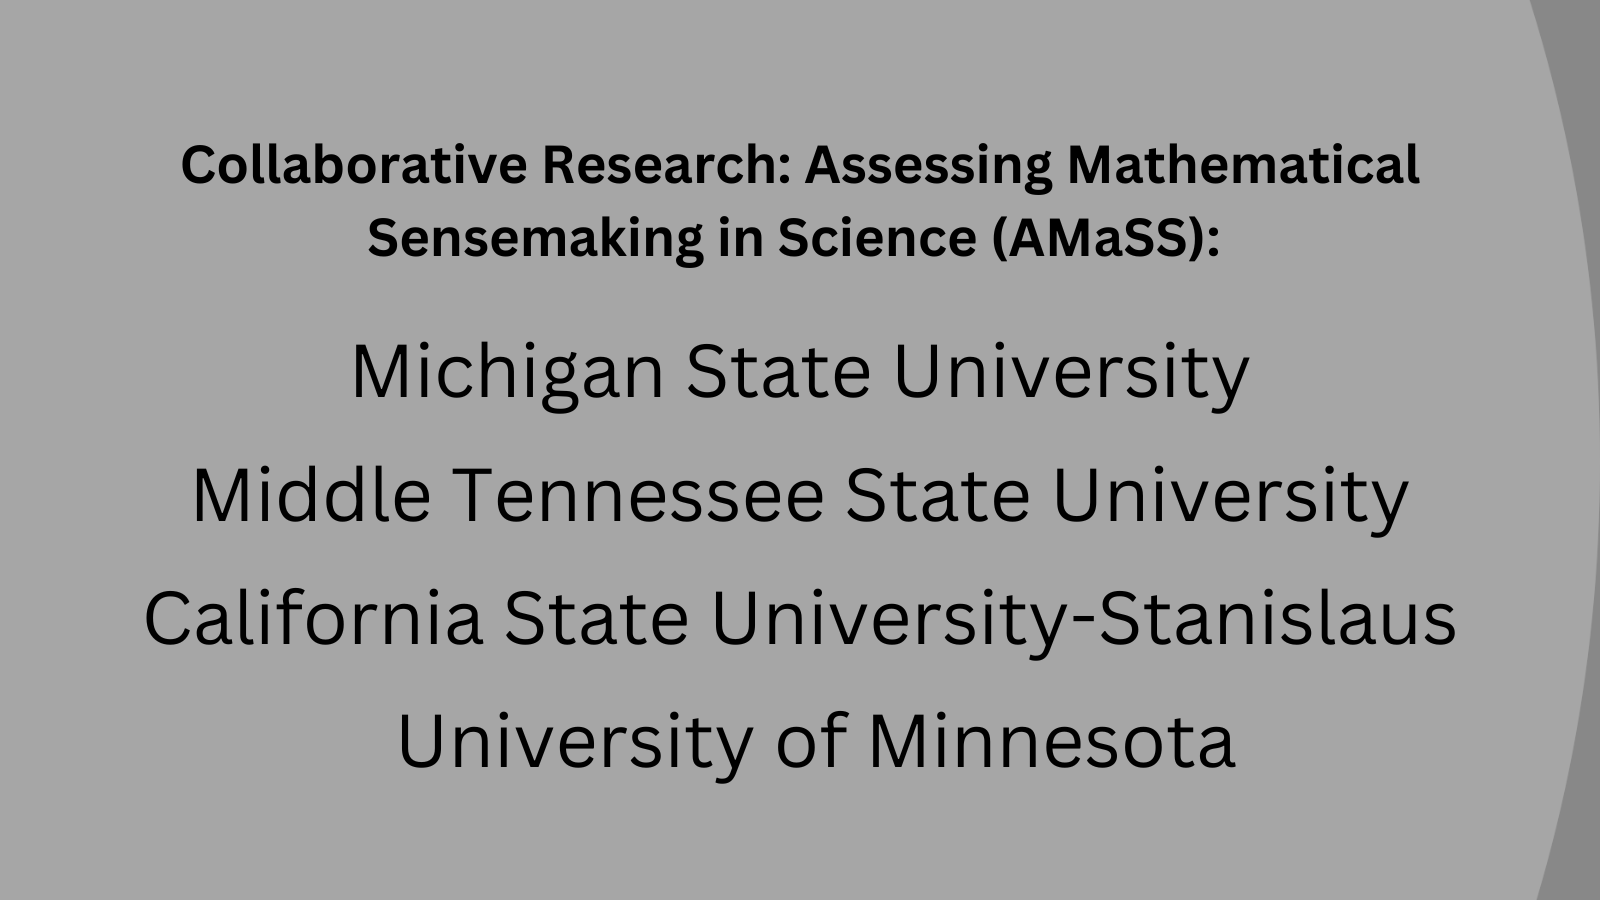 Collaborative Research Assessing Mathematical Sensemaking in Science (AMaSS)